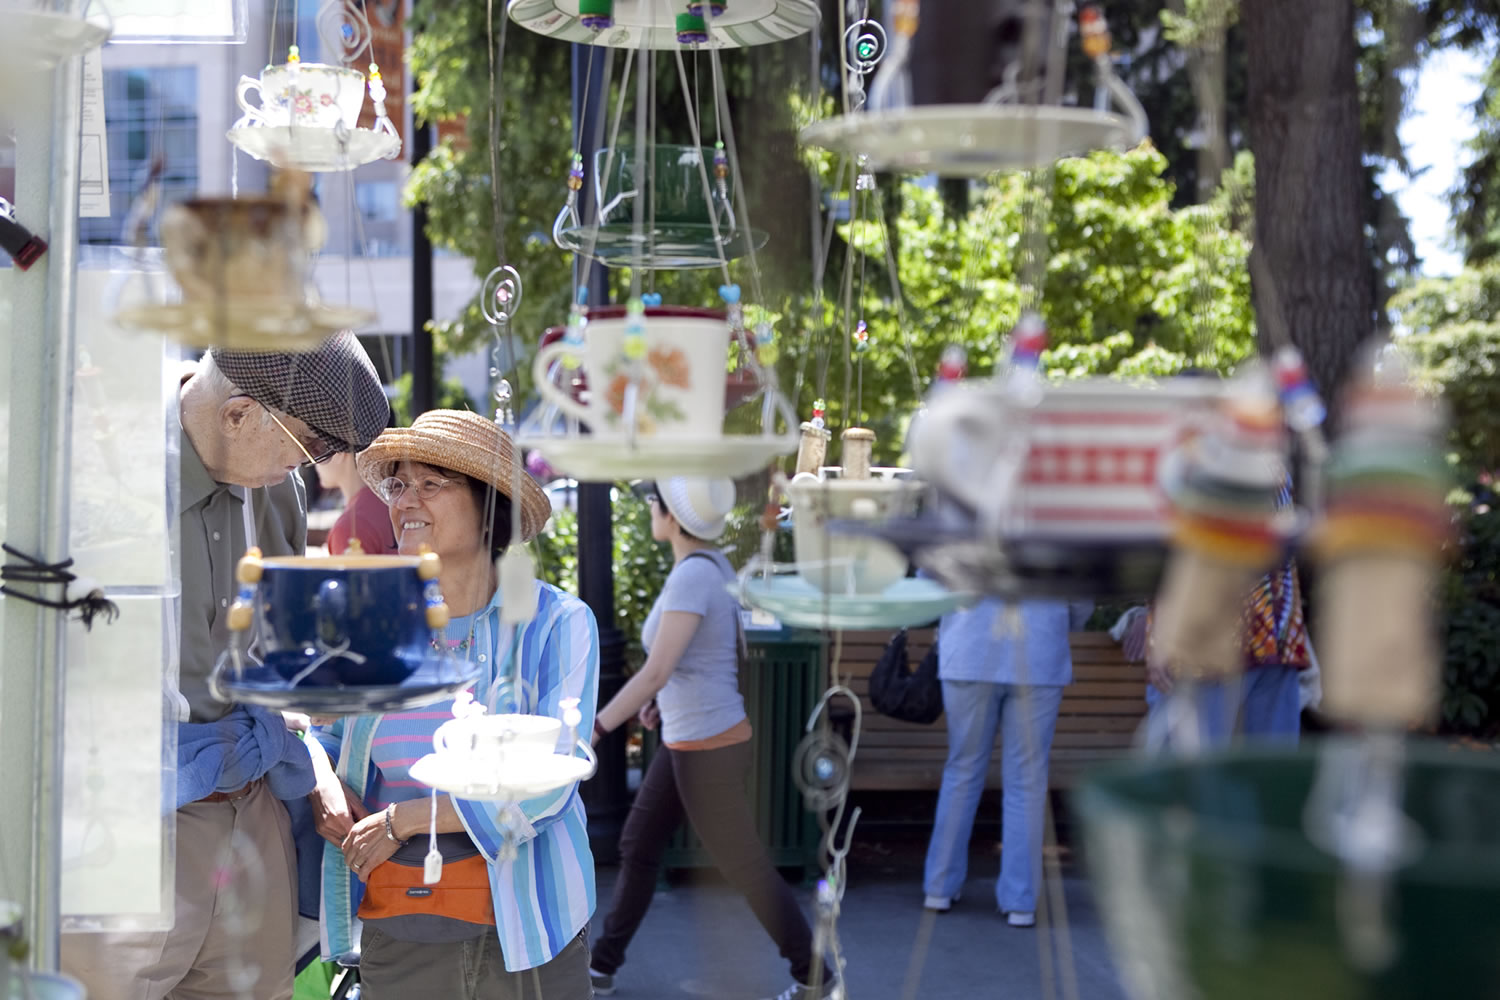 Mikiko Flynn and her husband, Tom, look at recycled bird feeders at last year's Recycled Arts Festival, a celebration of art created from recycled materials.